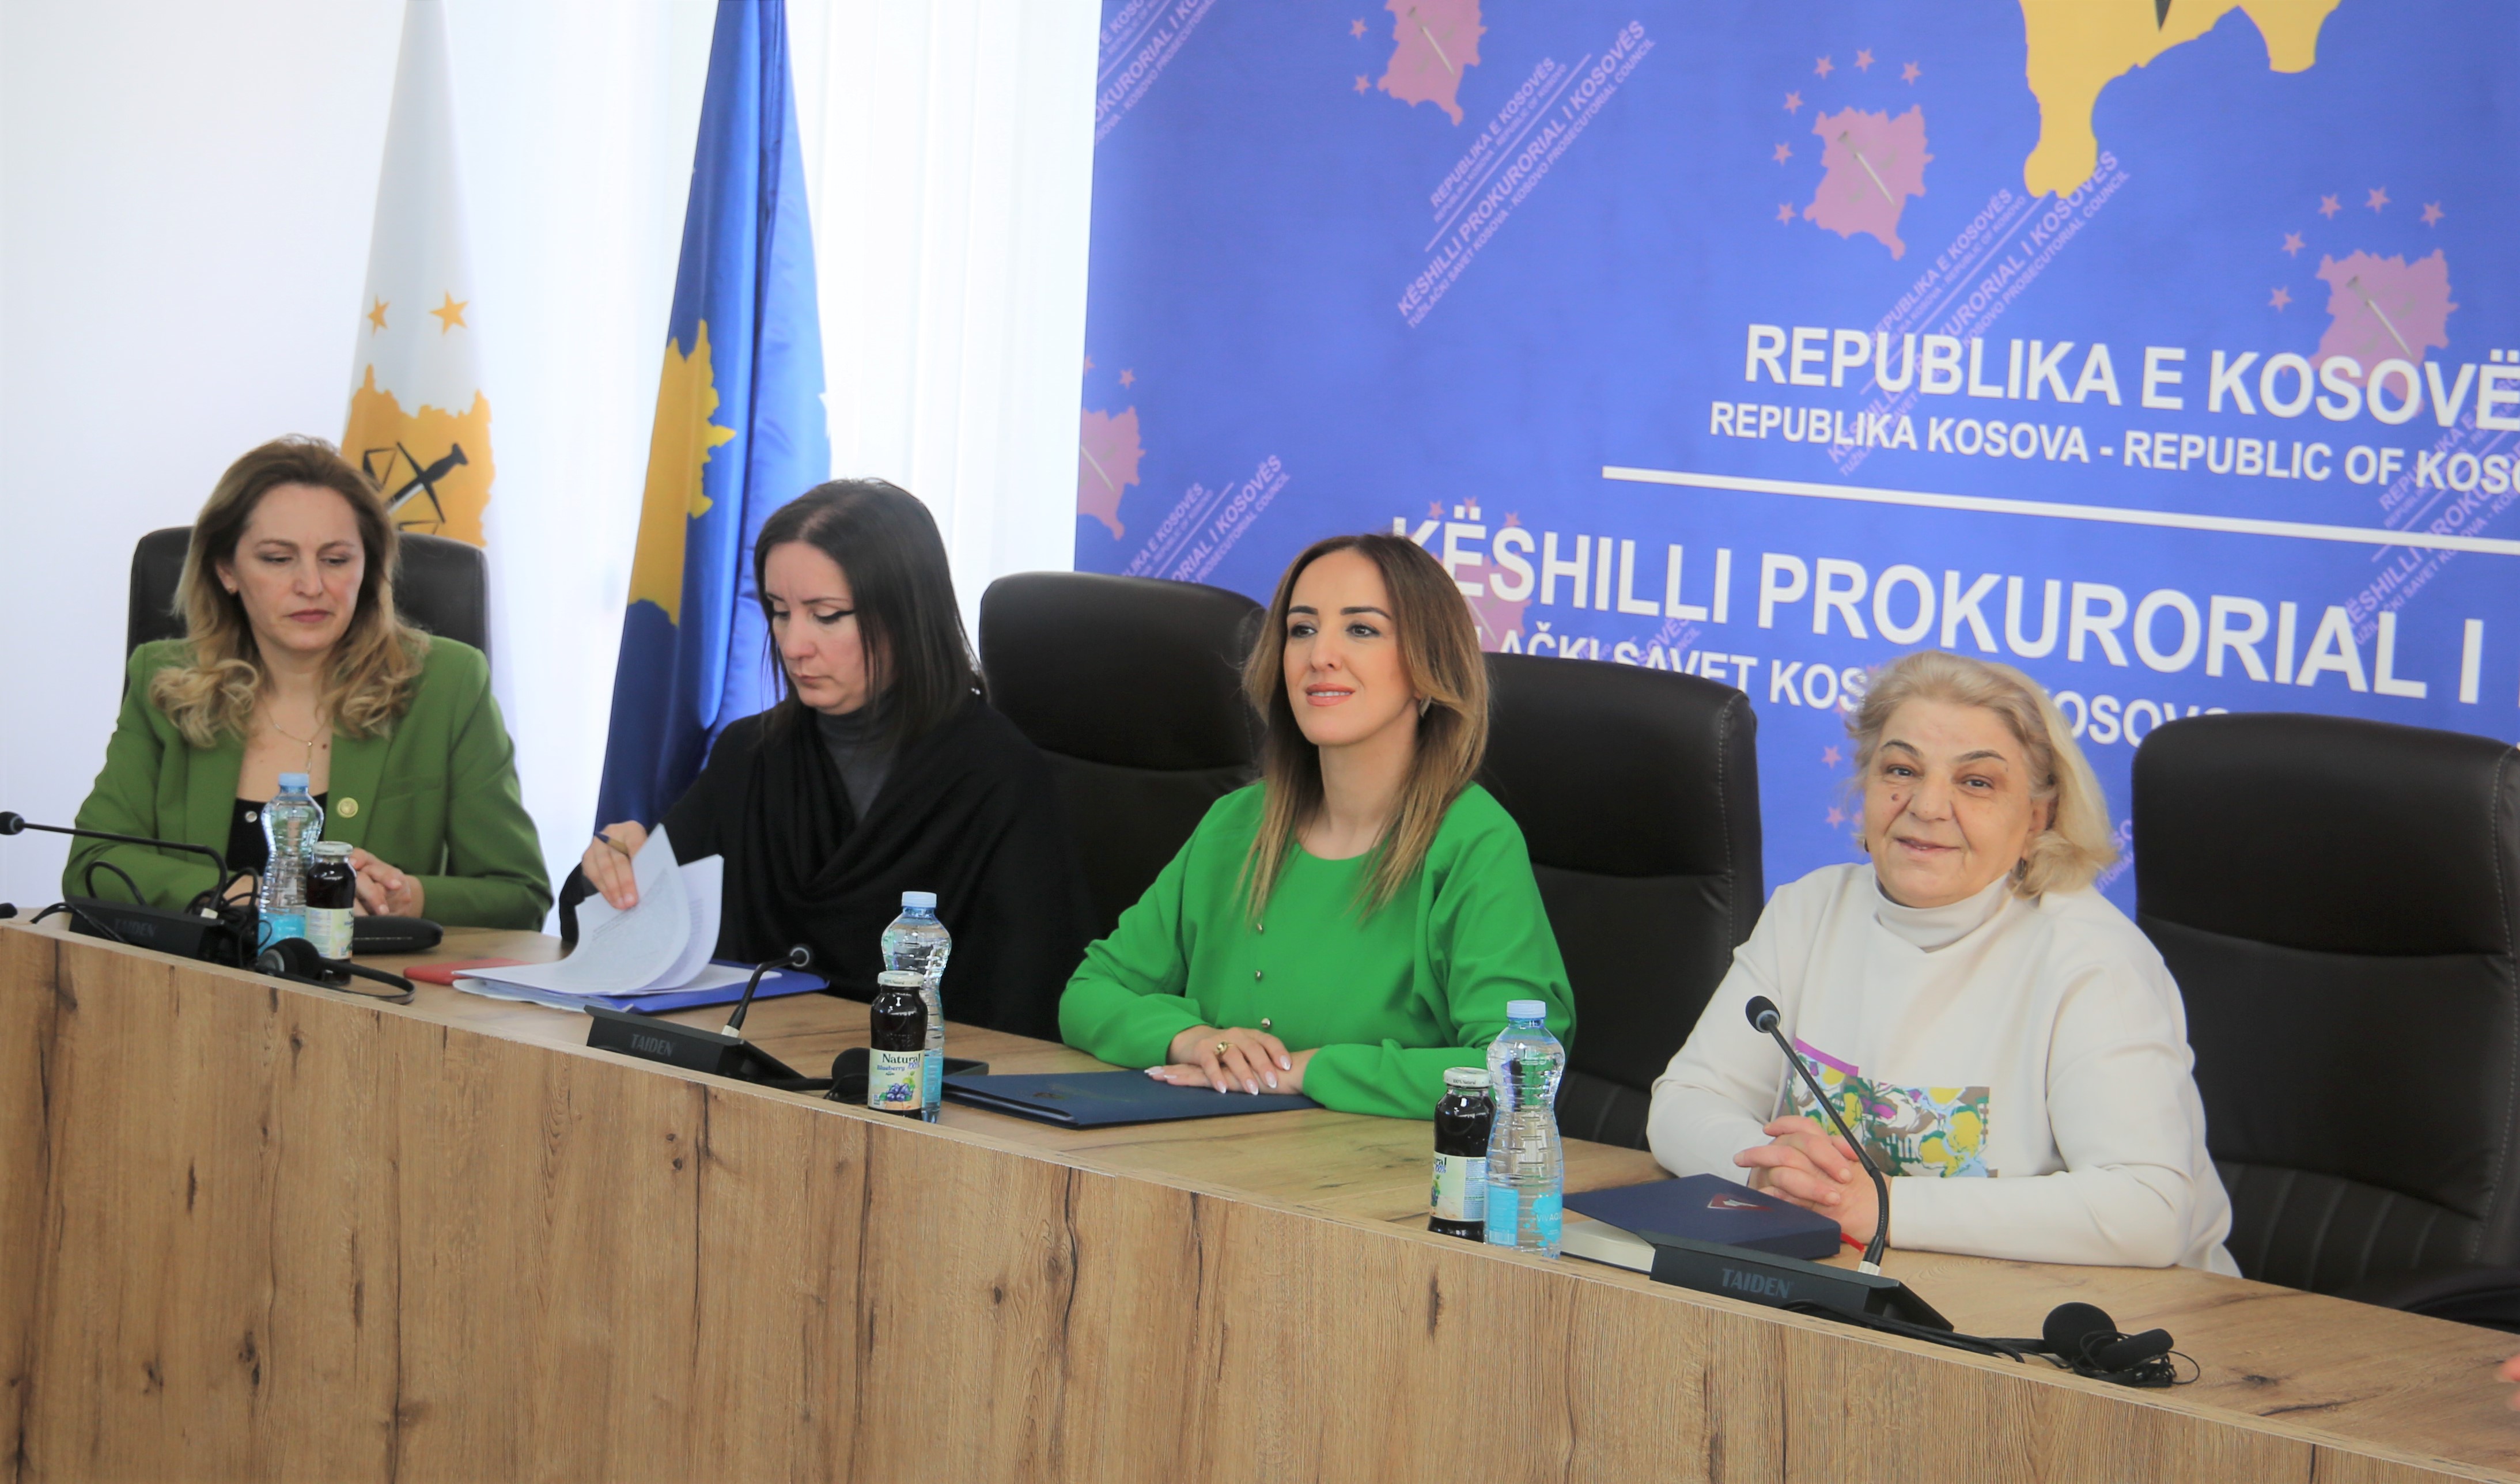 The celebration ceremony of March 8 - Women's Day is held in the prosecution system